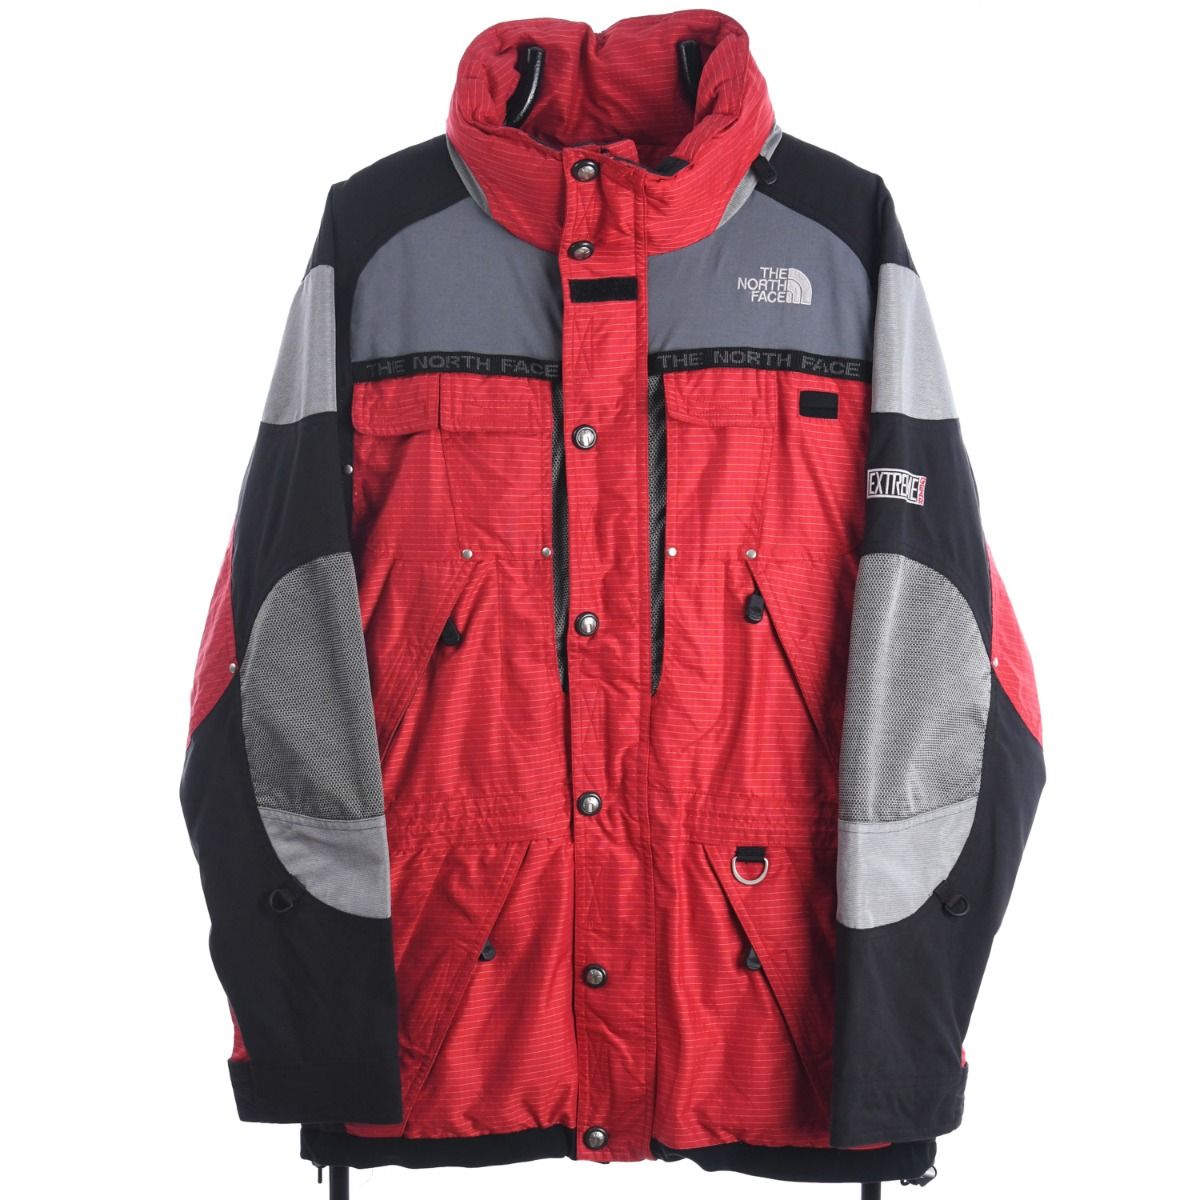 The North Face Extreme Gear Jacket